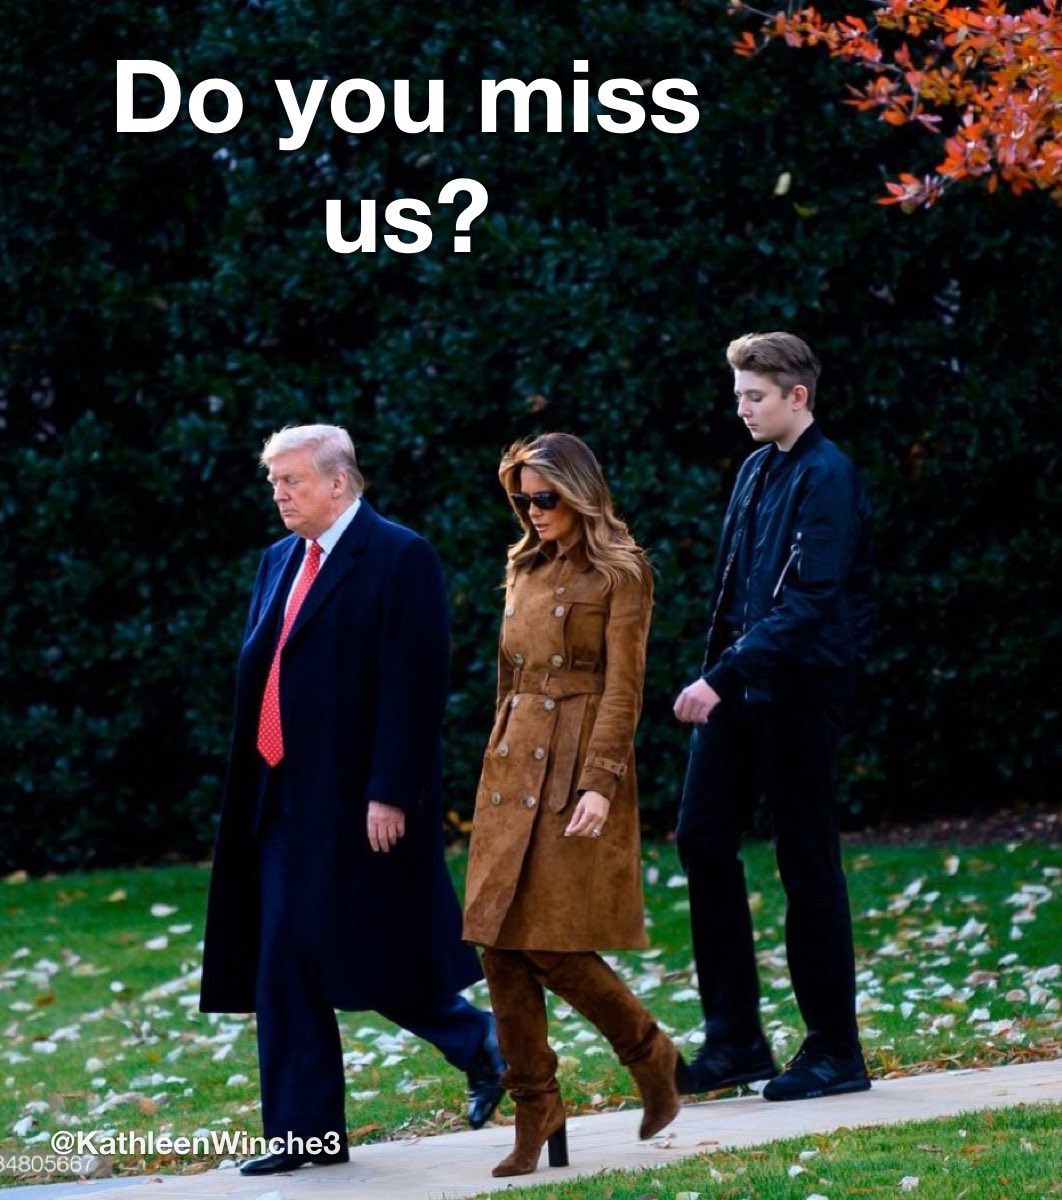 Yes all #Patriots love and miss our #firstfamily #Trumps